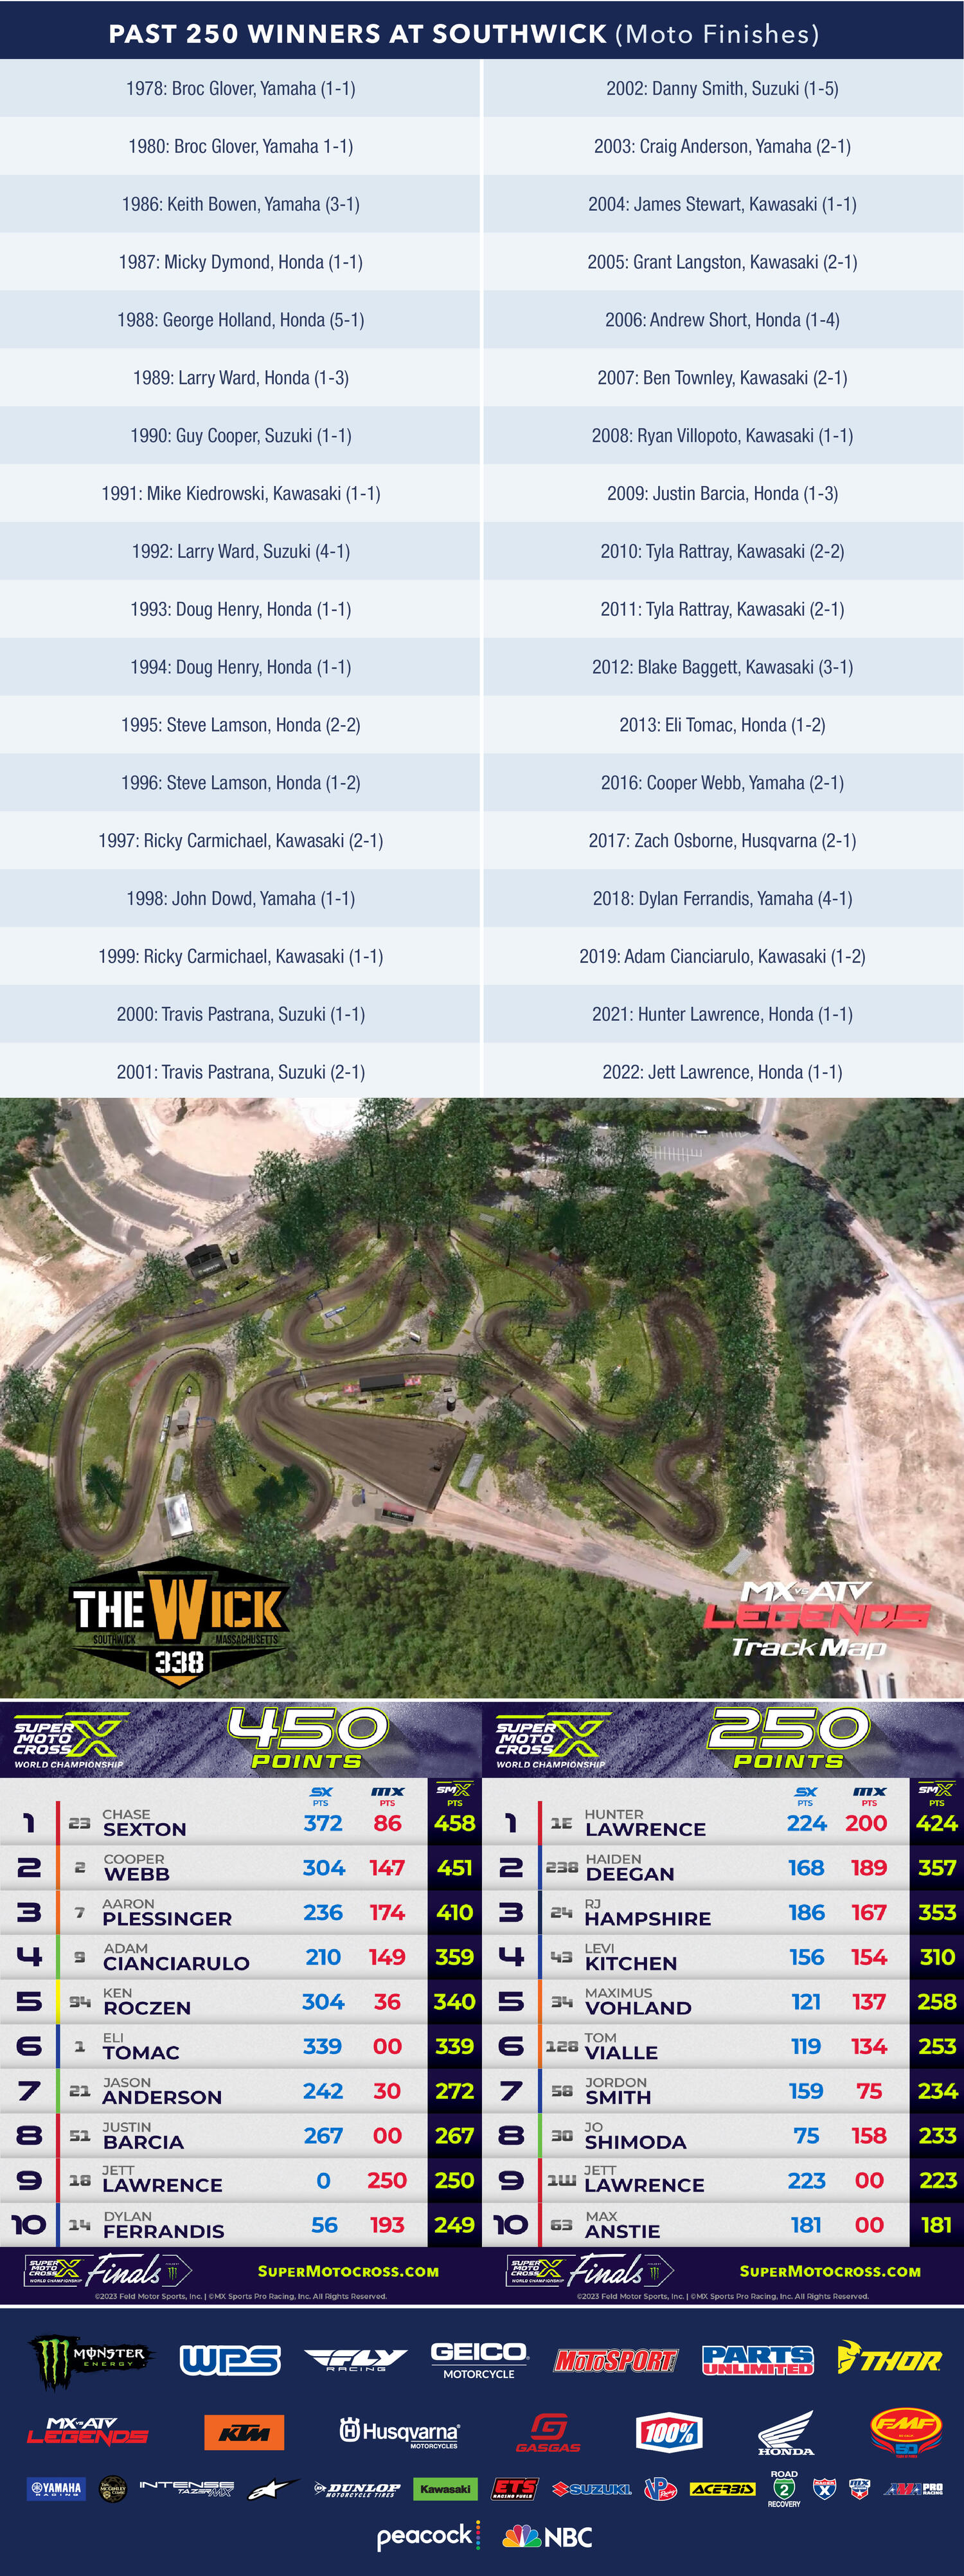 This Week in Motocross 2023 Southwick National Pro Motocross